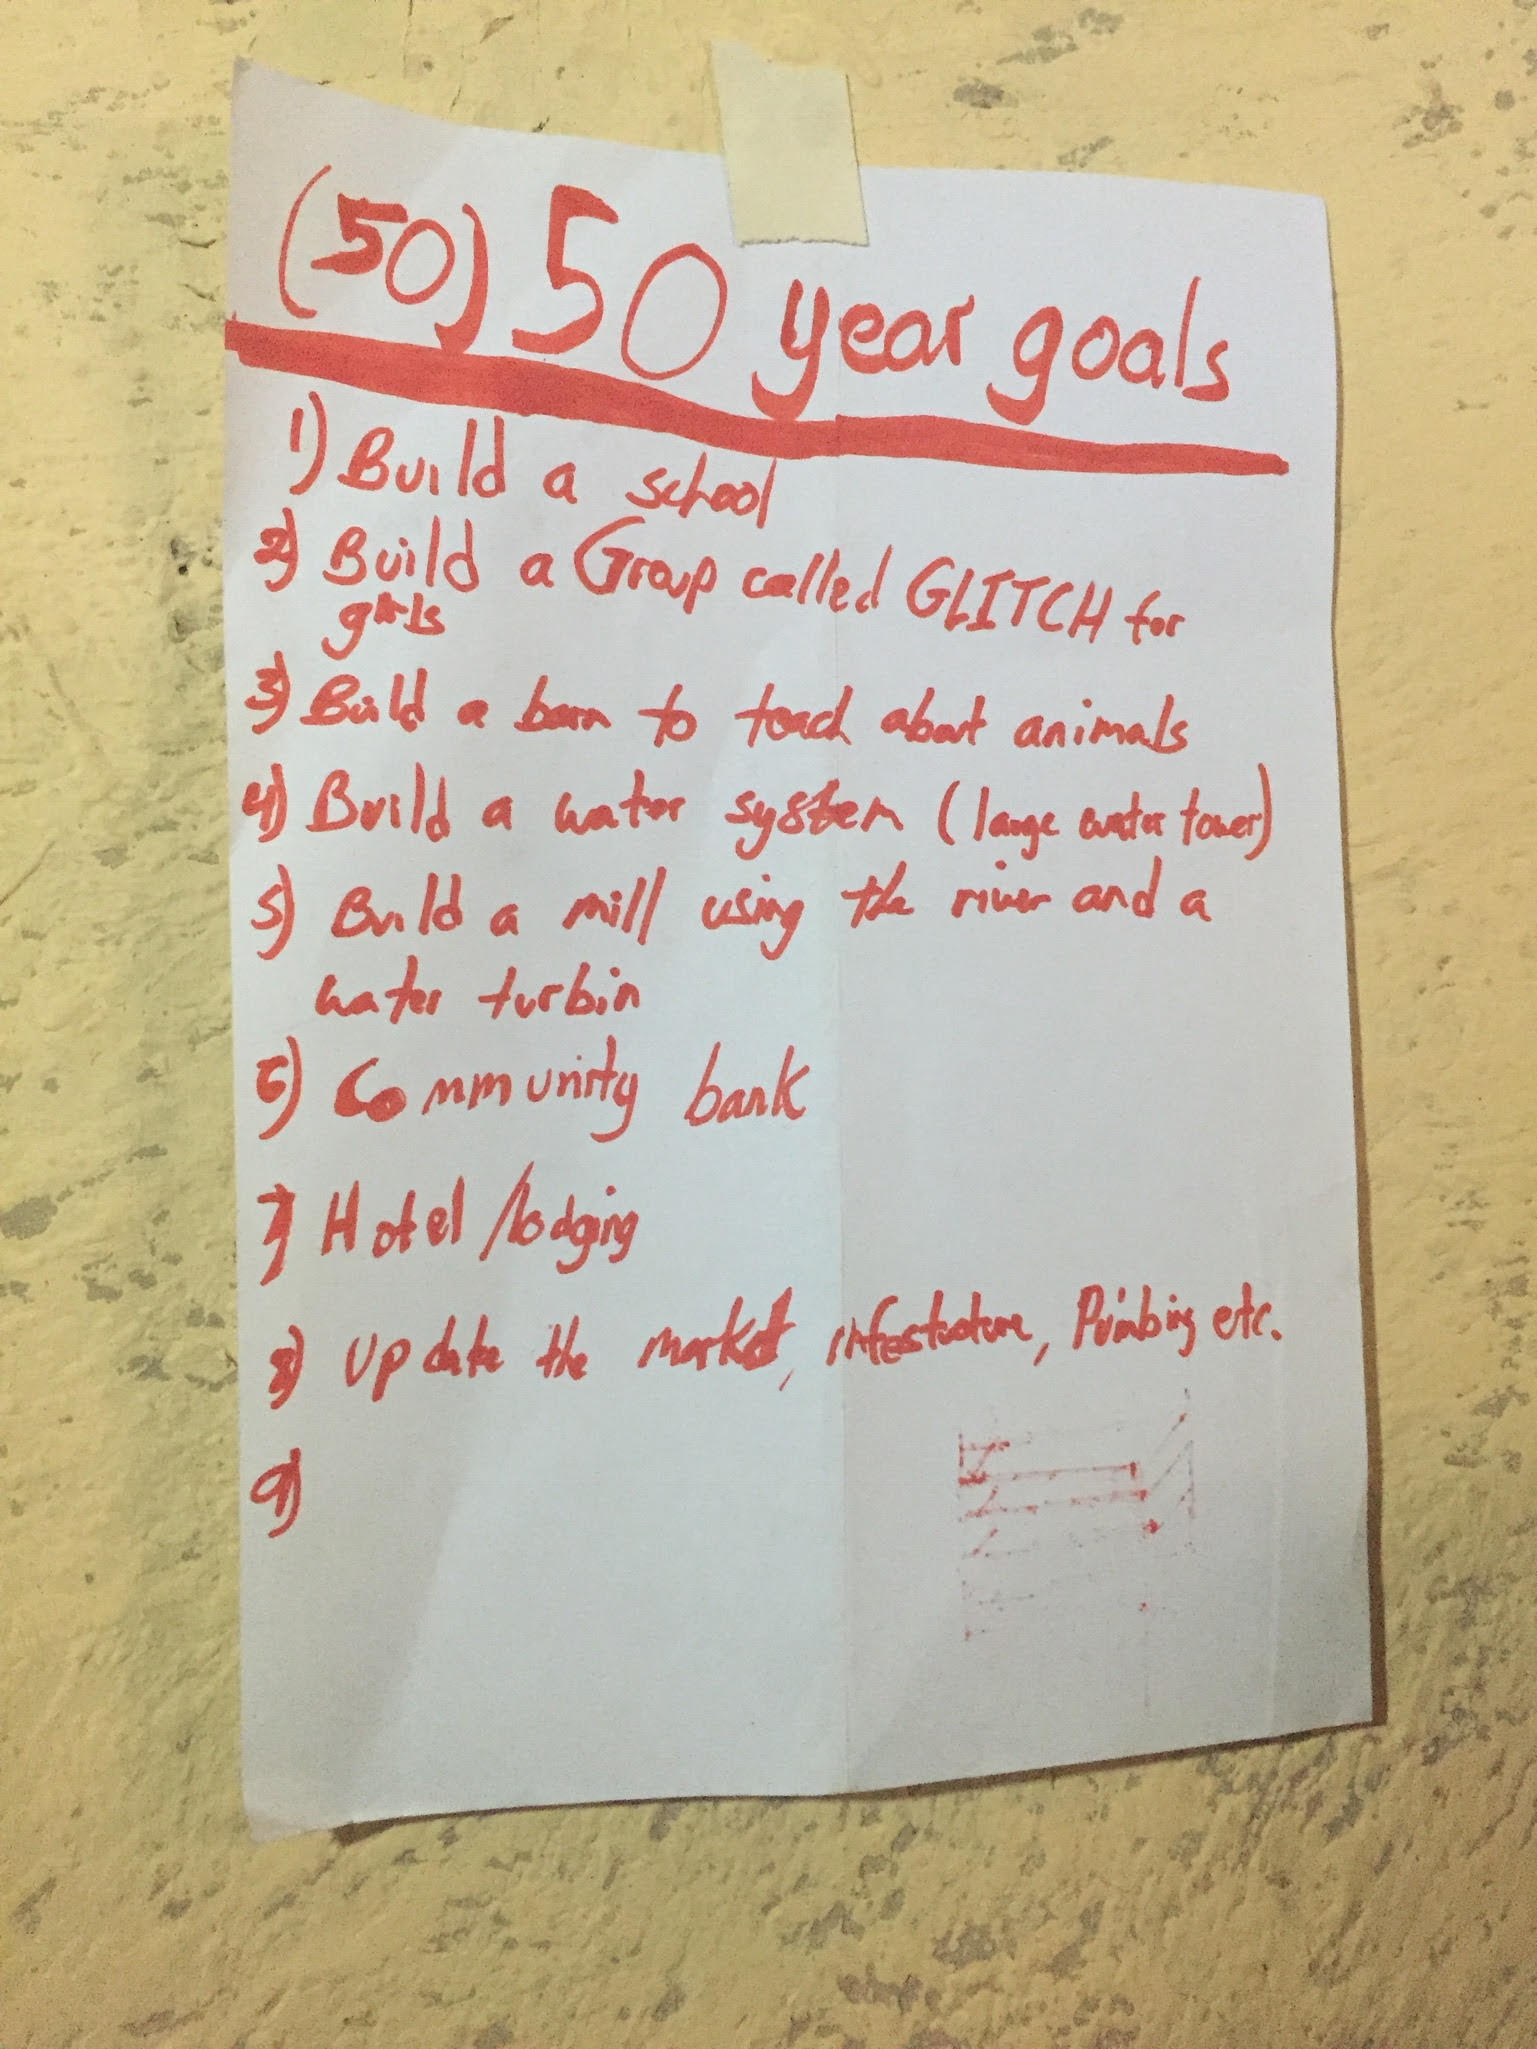 His 50-Year Goals